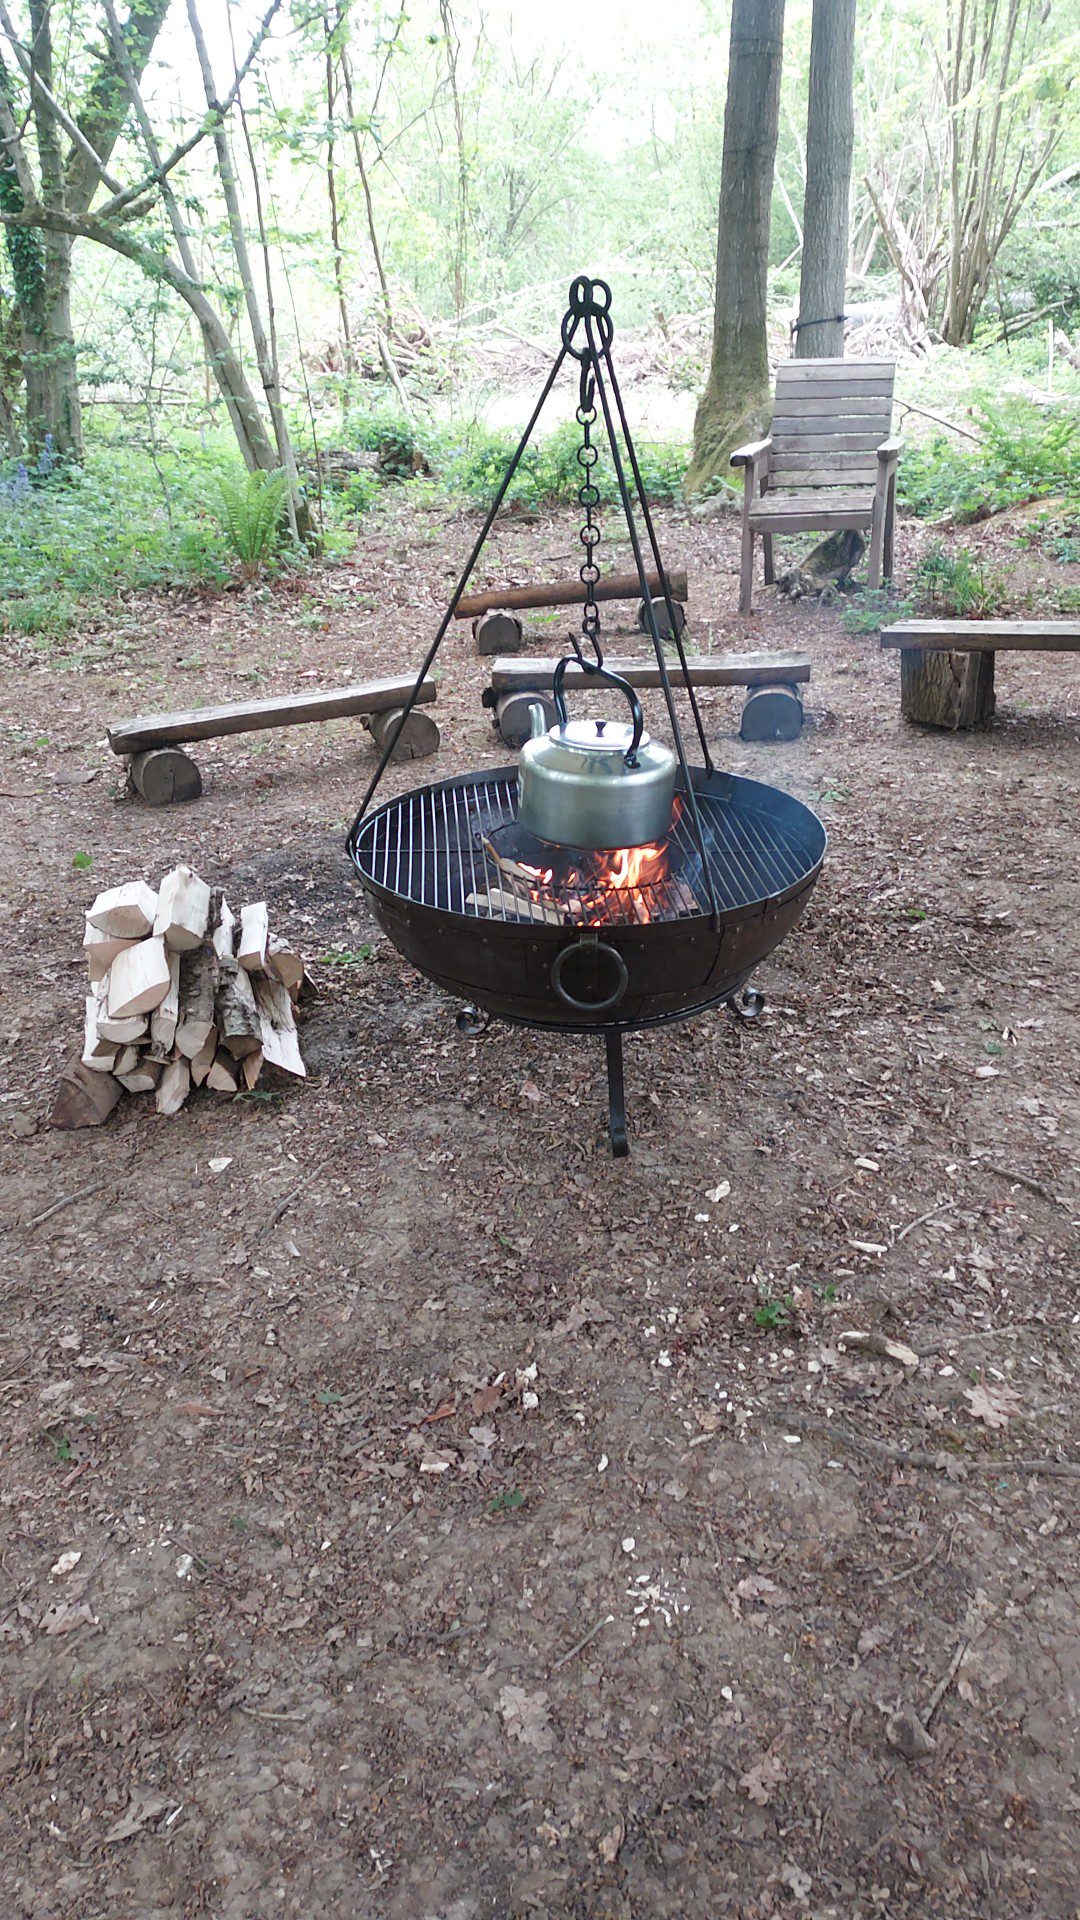 Fire pit in woodland clearing, with small wooden benches.